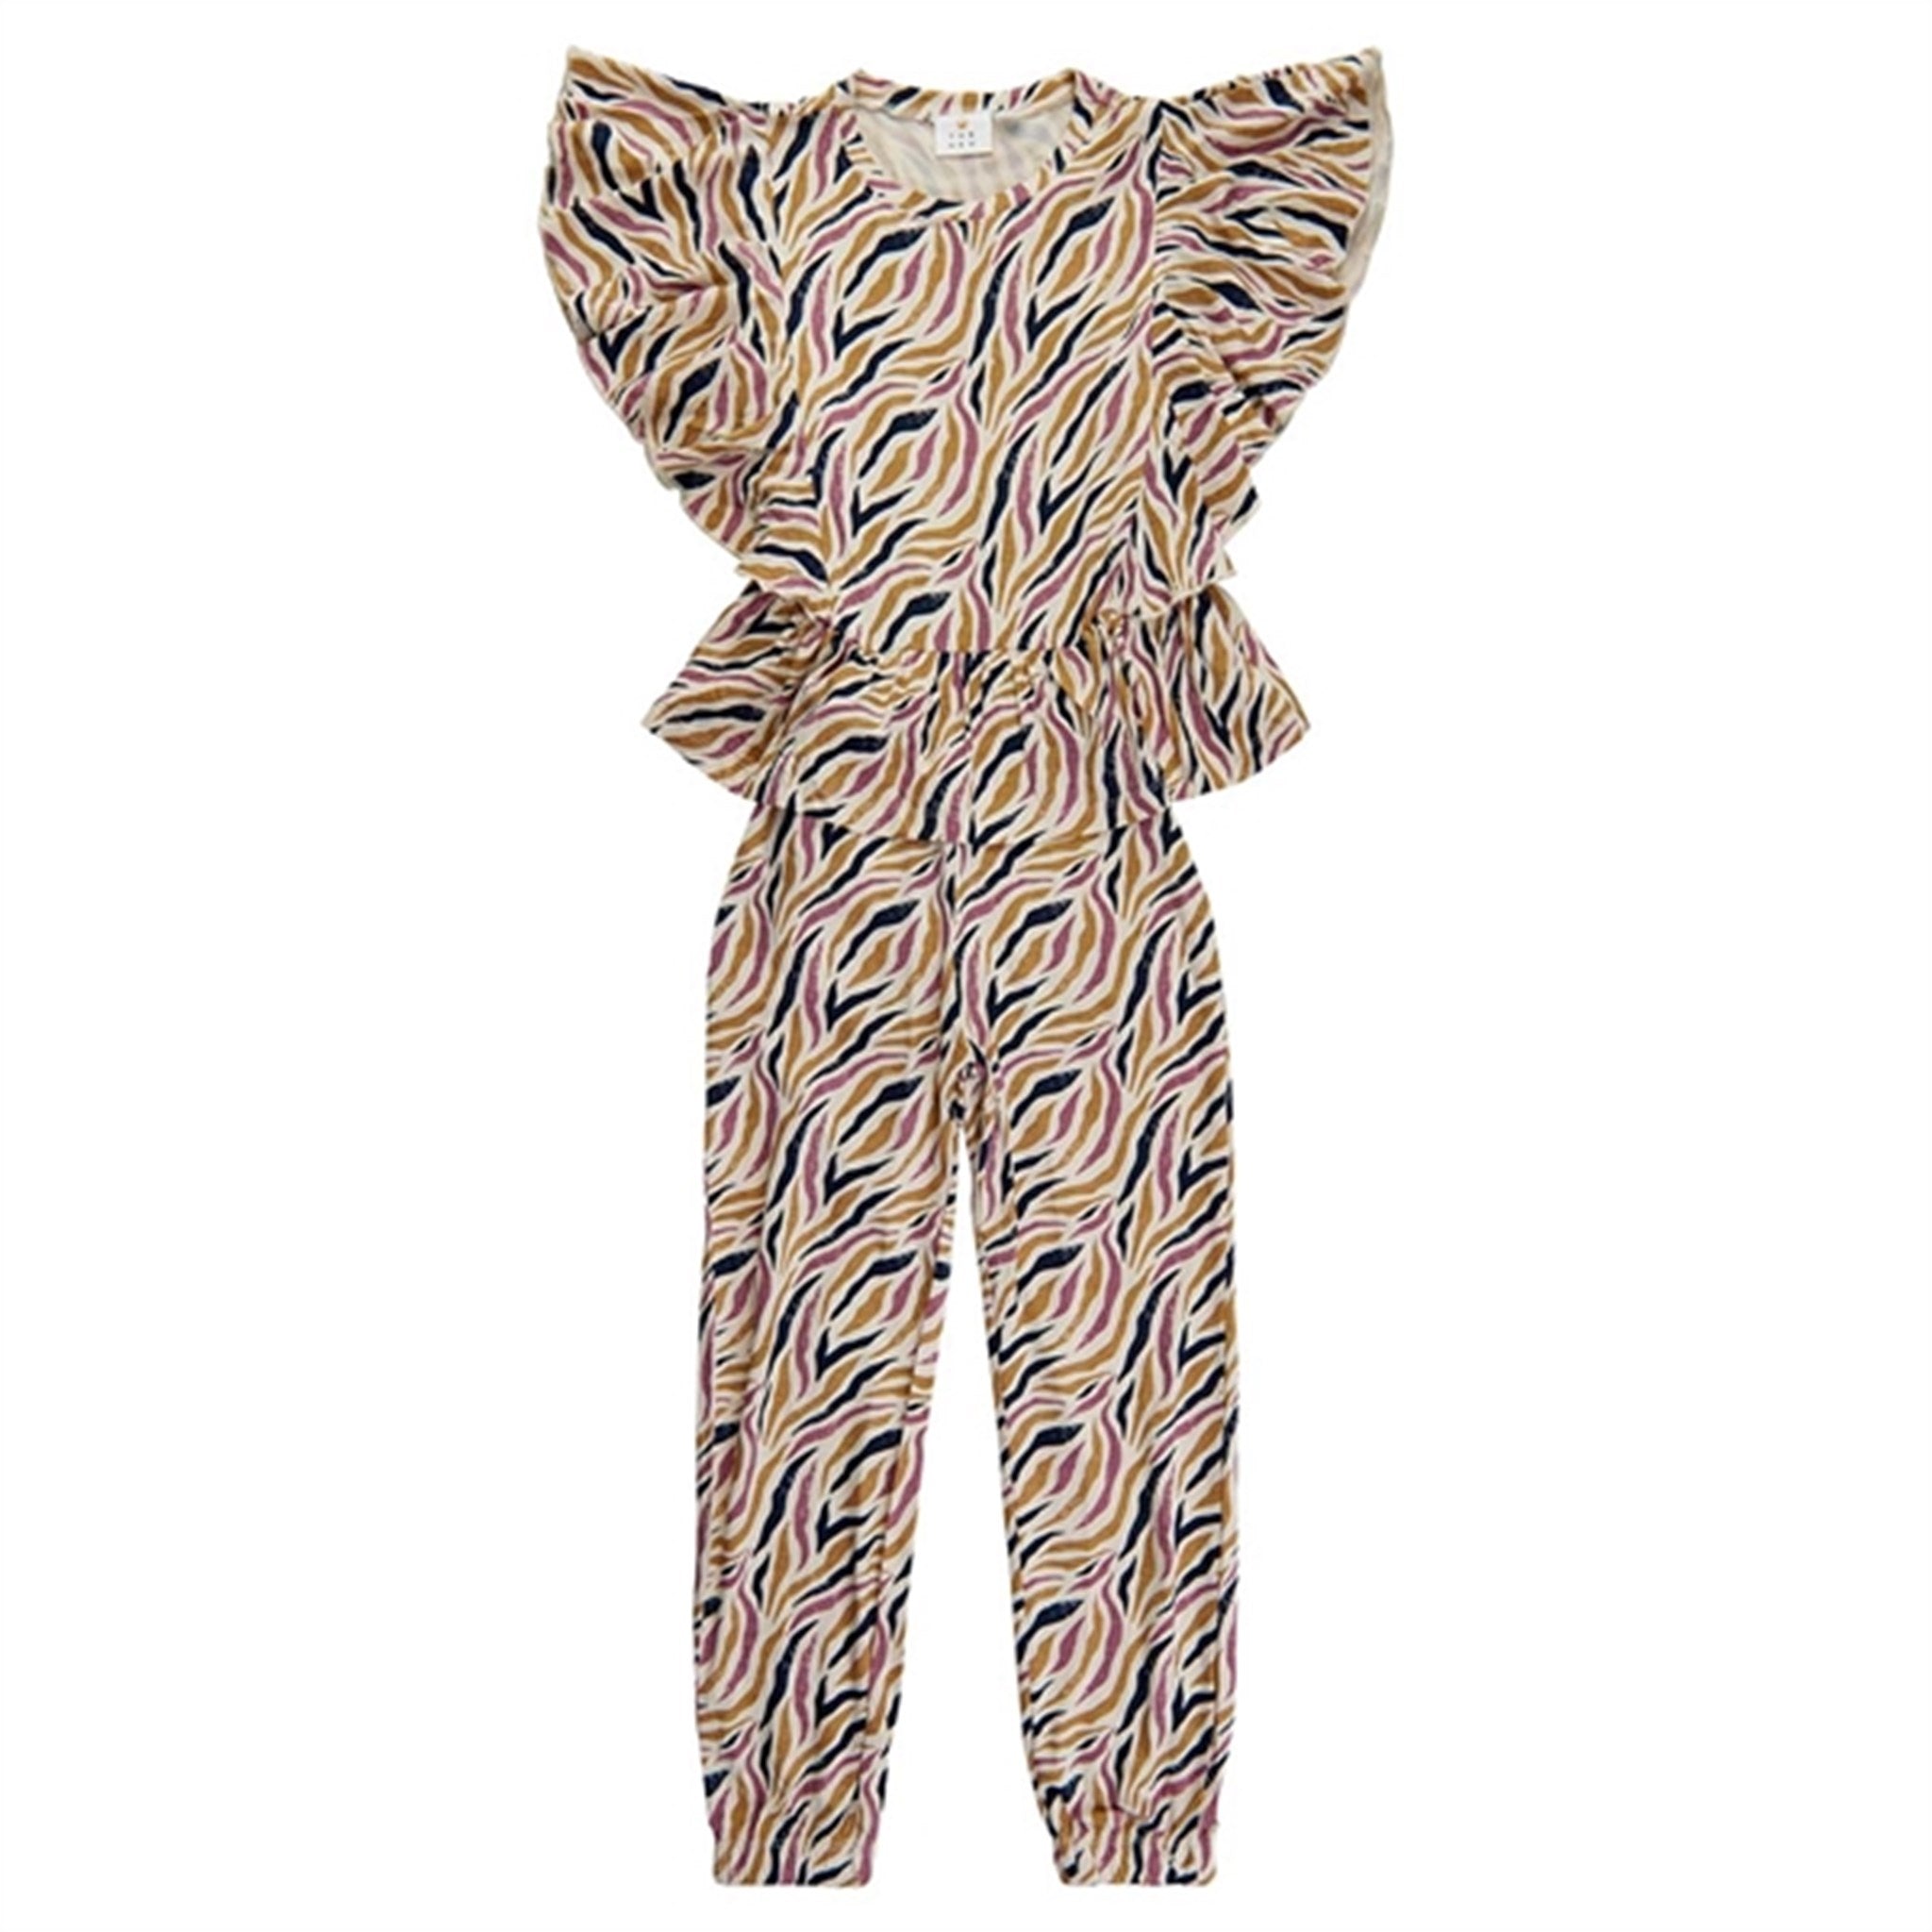 The New Floral Aop Try Jumpsuit